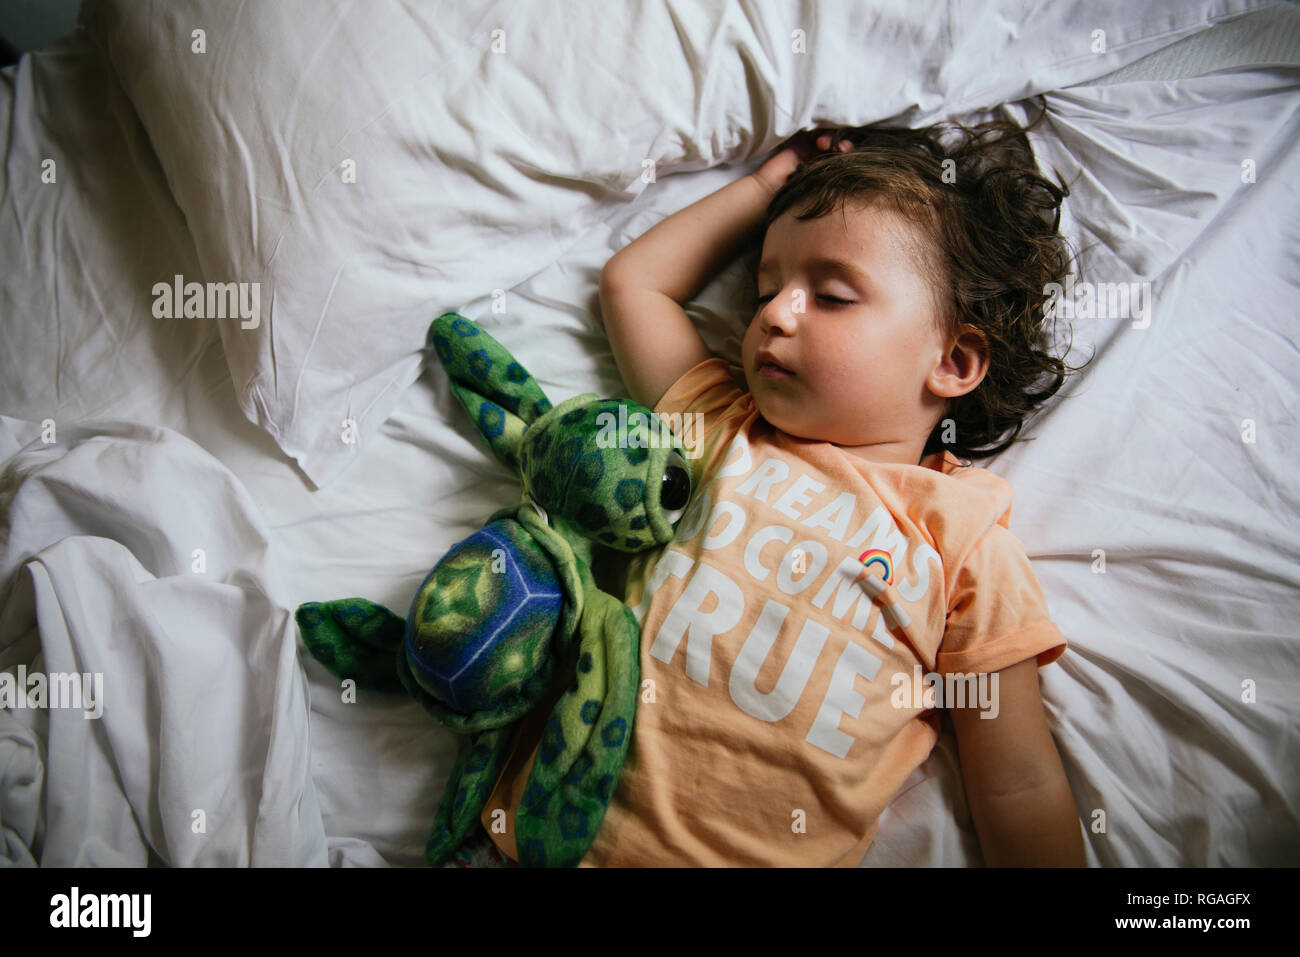 Baby Girl sleeping on bed avec t-shirt message "rêves viennent vrai' Banque D'Images